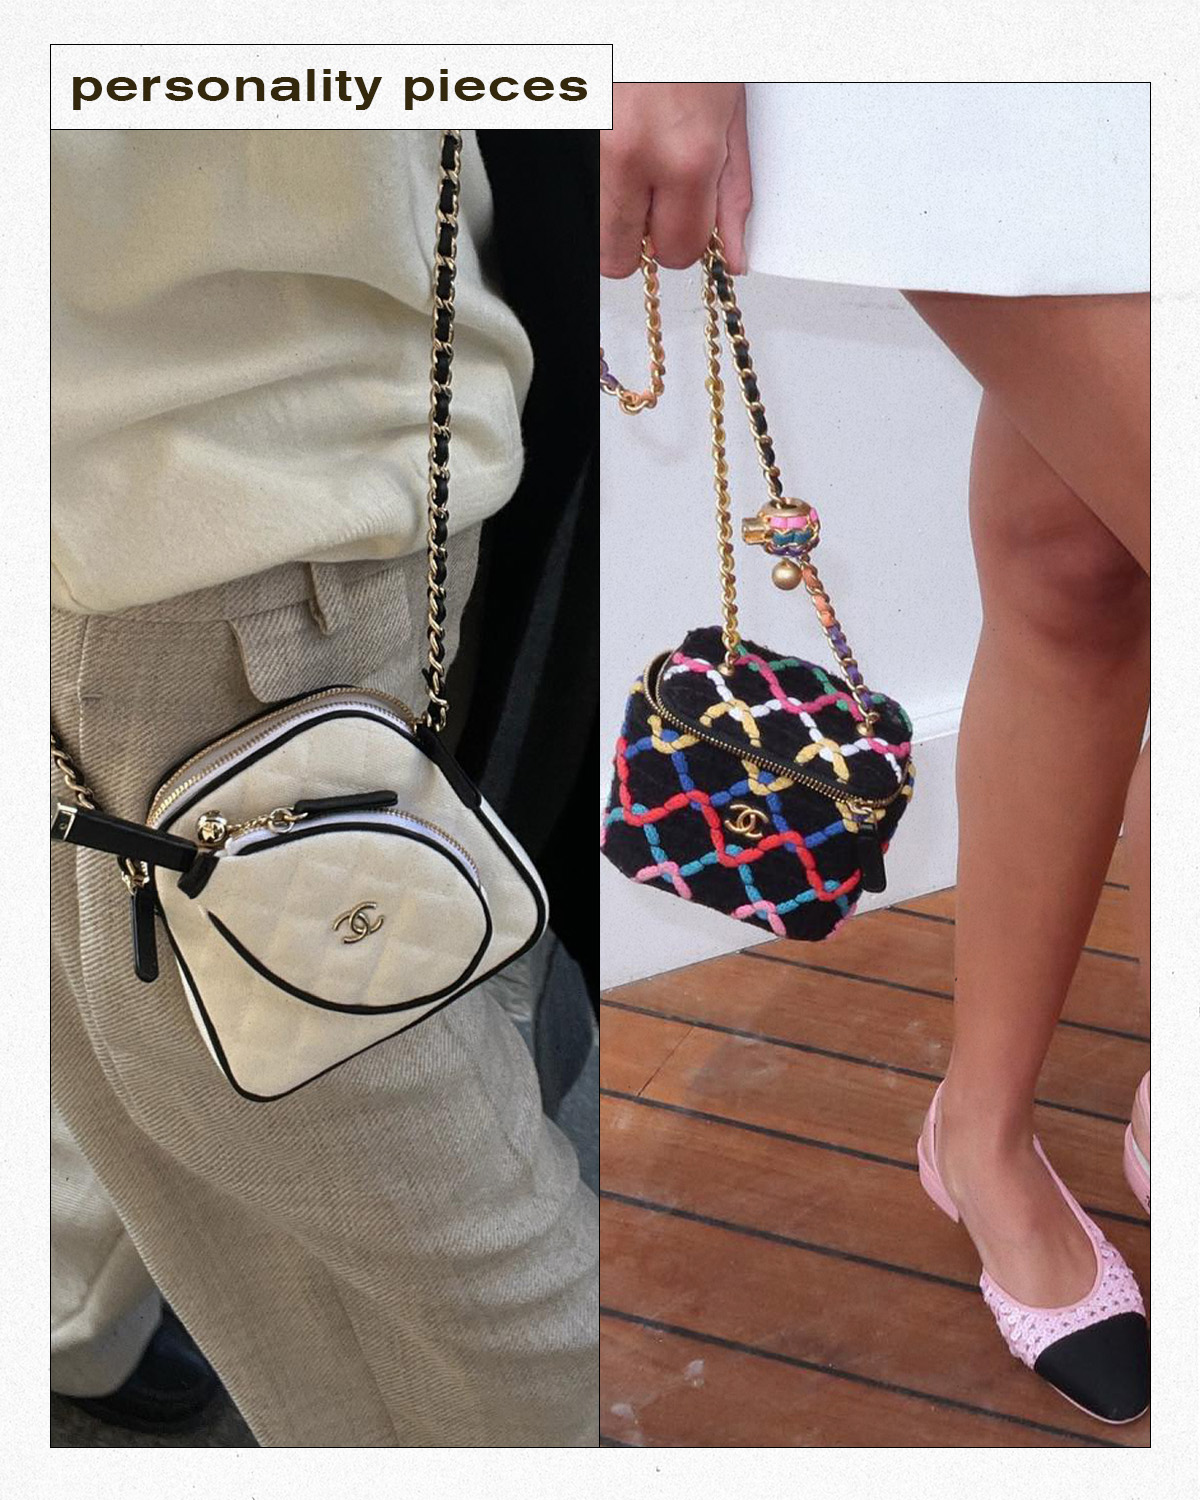 Handbags You'll Be Seeing Everywhere In Summer 2023